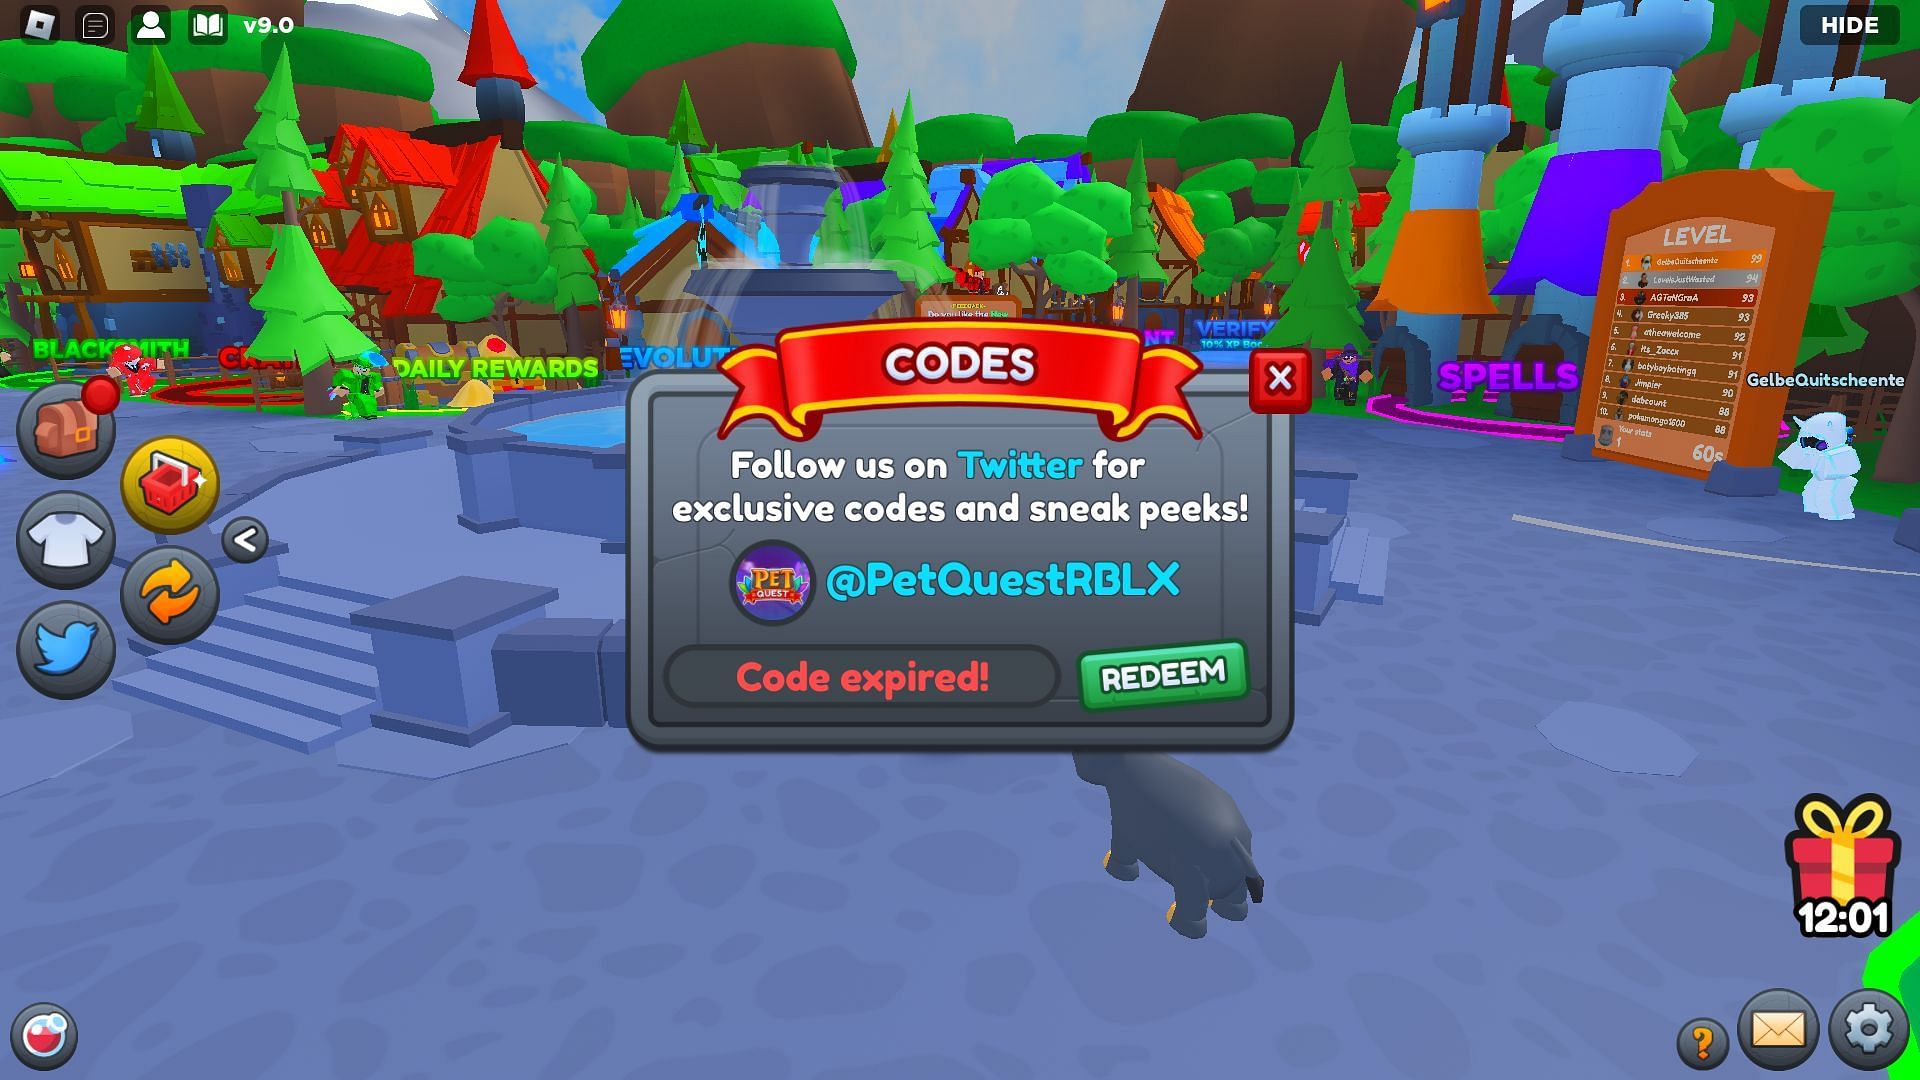 Troubleshooting codes for Pet Quest RPG (Image via Roblox)